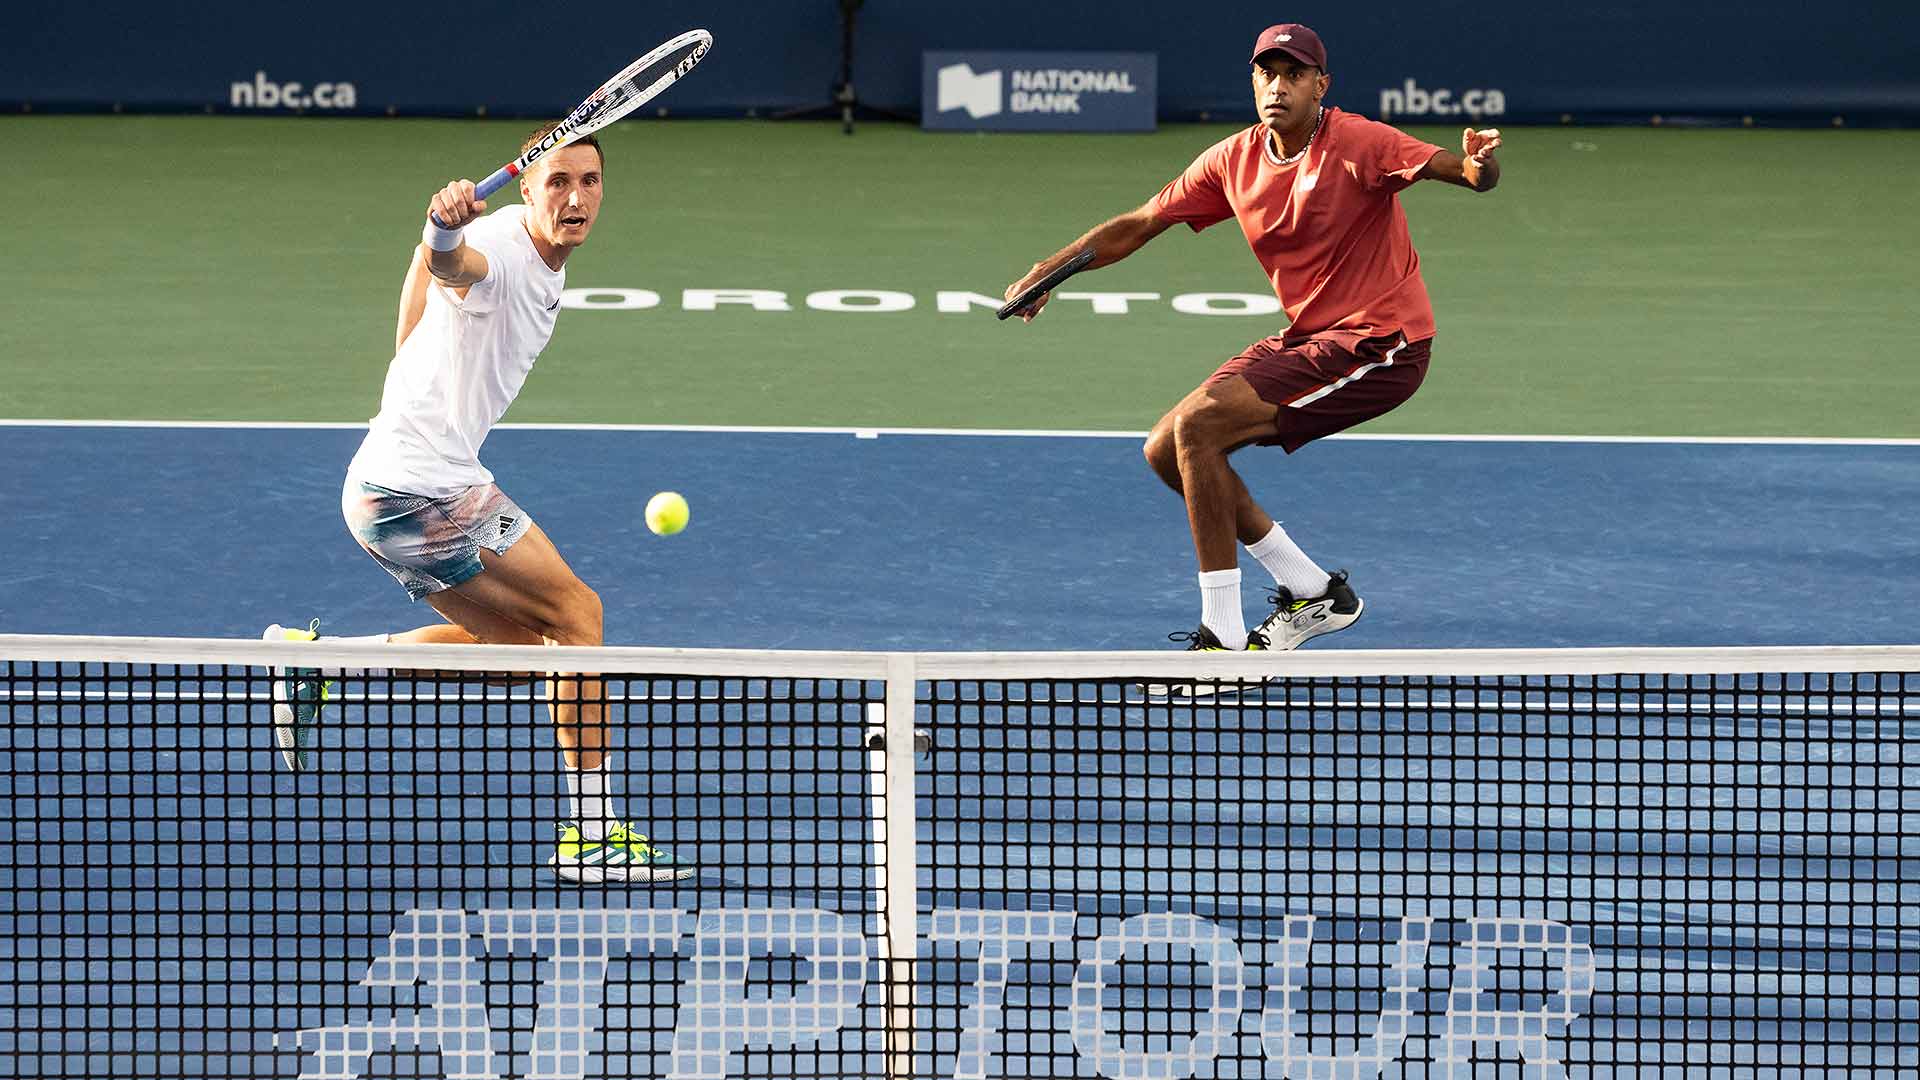 Arevalo/Rojer Finish Strong To Book Toronto Final Berth ATP Tour Tennis